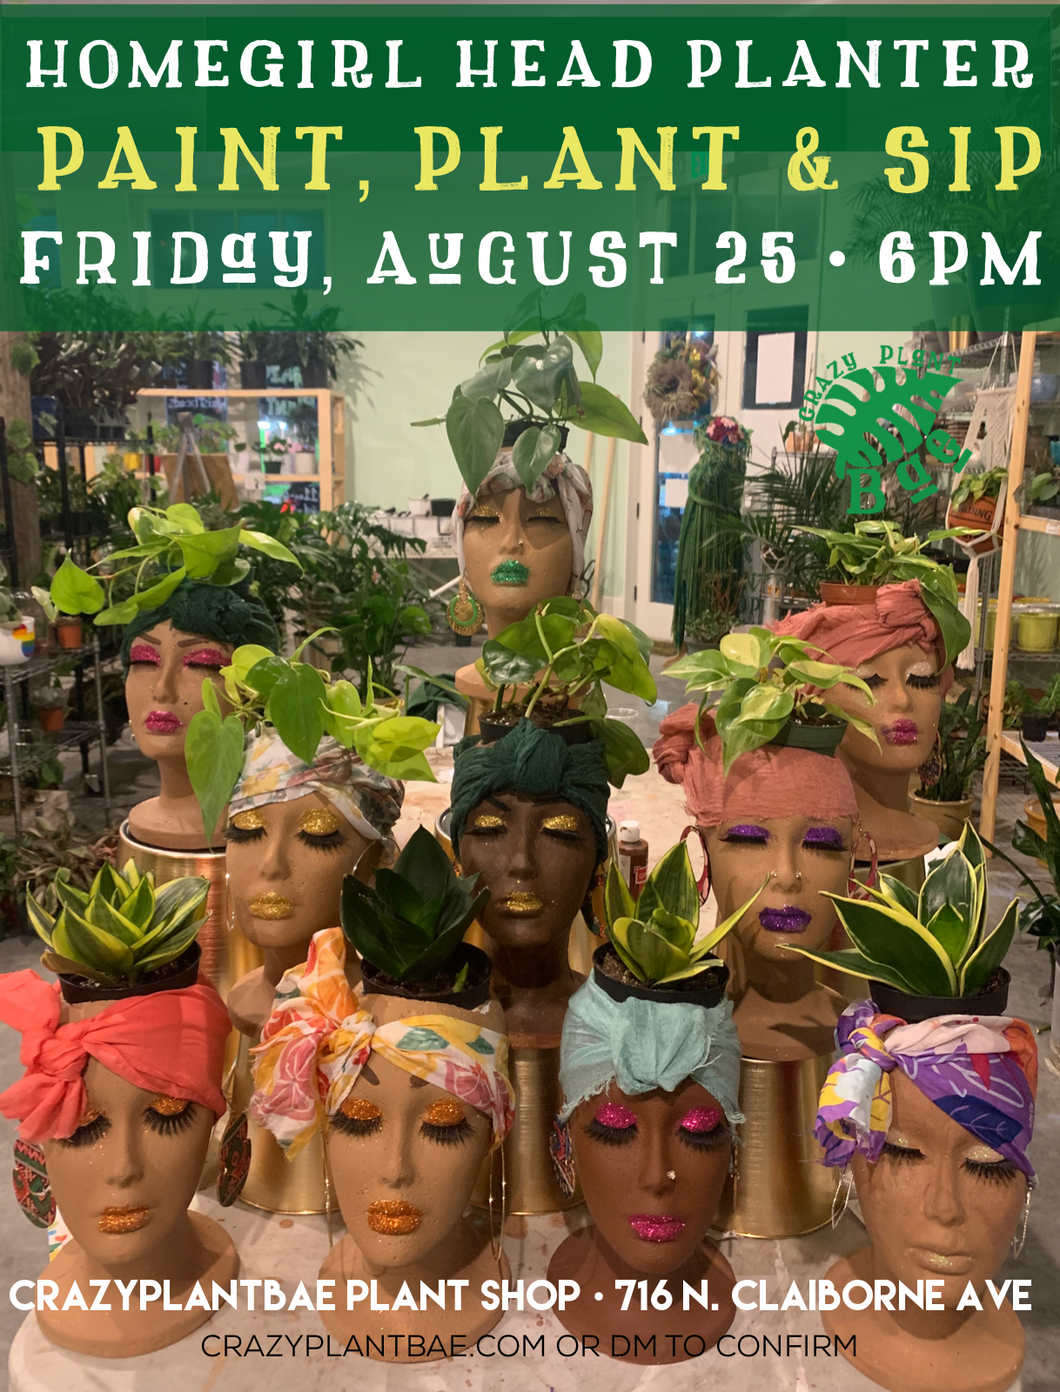 Home Girl Head Paint & Sip Friday August 25